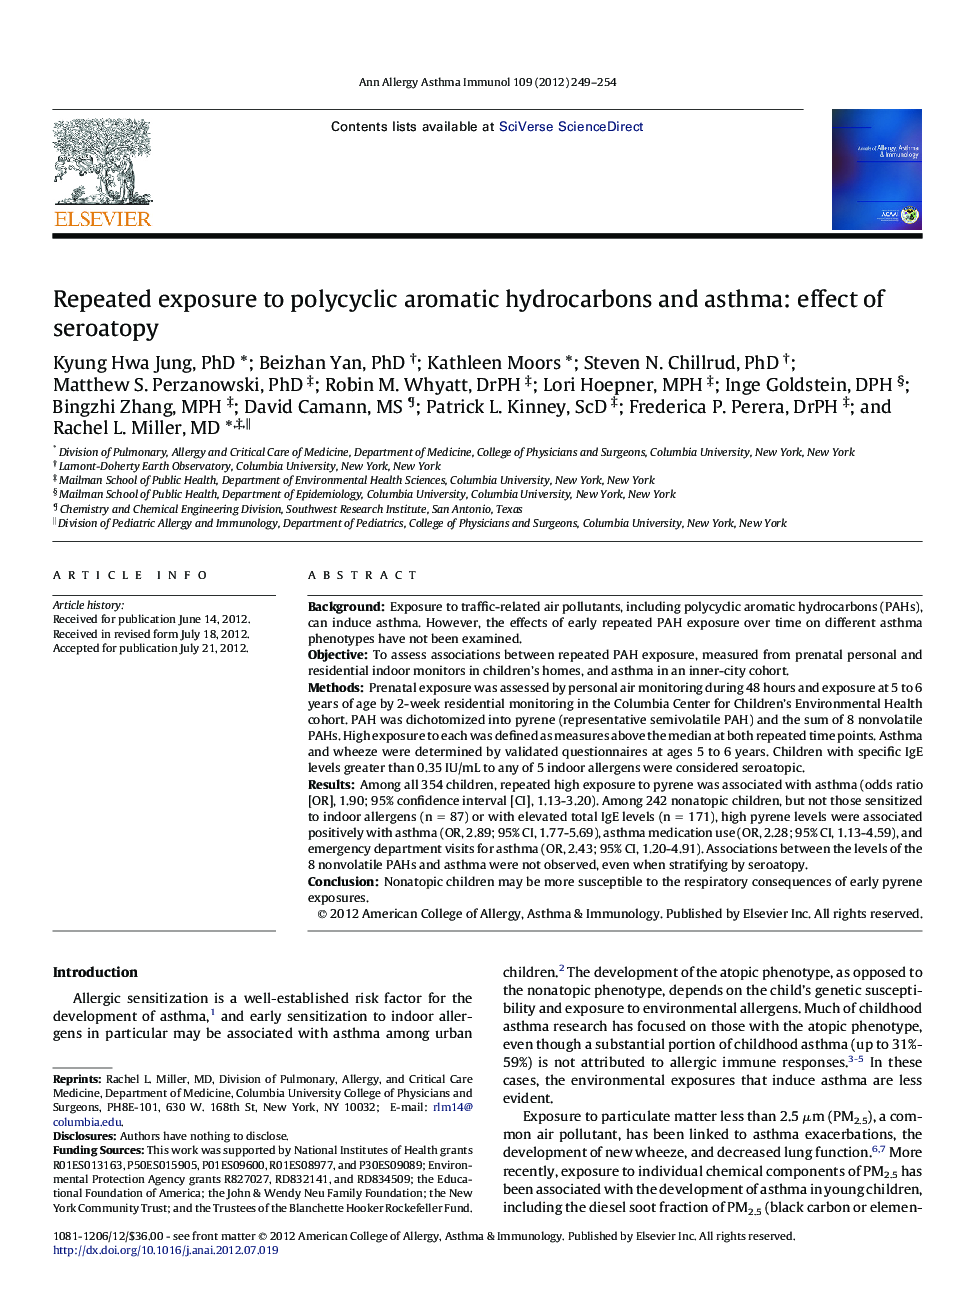 Repeated exposure to polycyclic aromatic hydrocarbons and asthma: effect of seroatopy